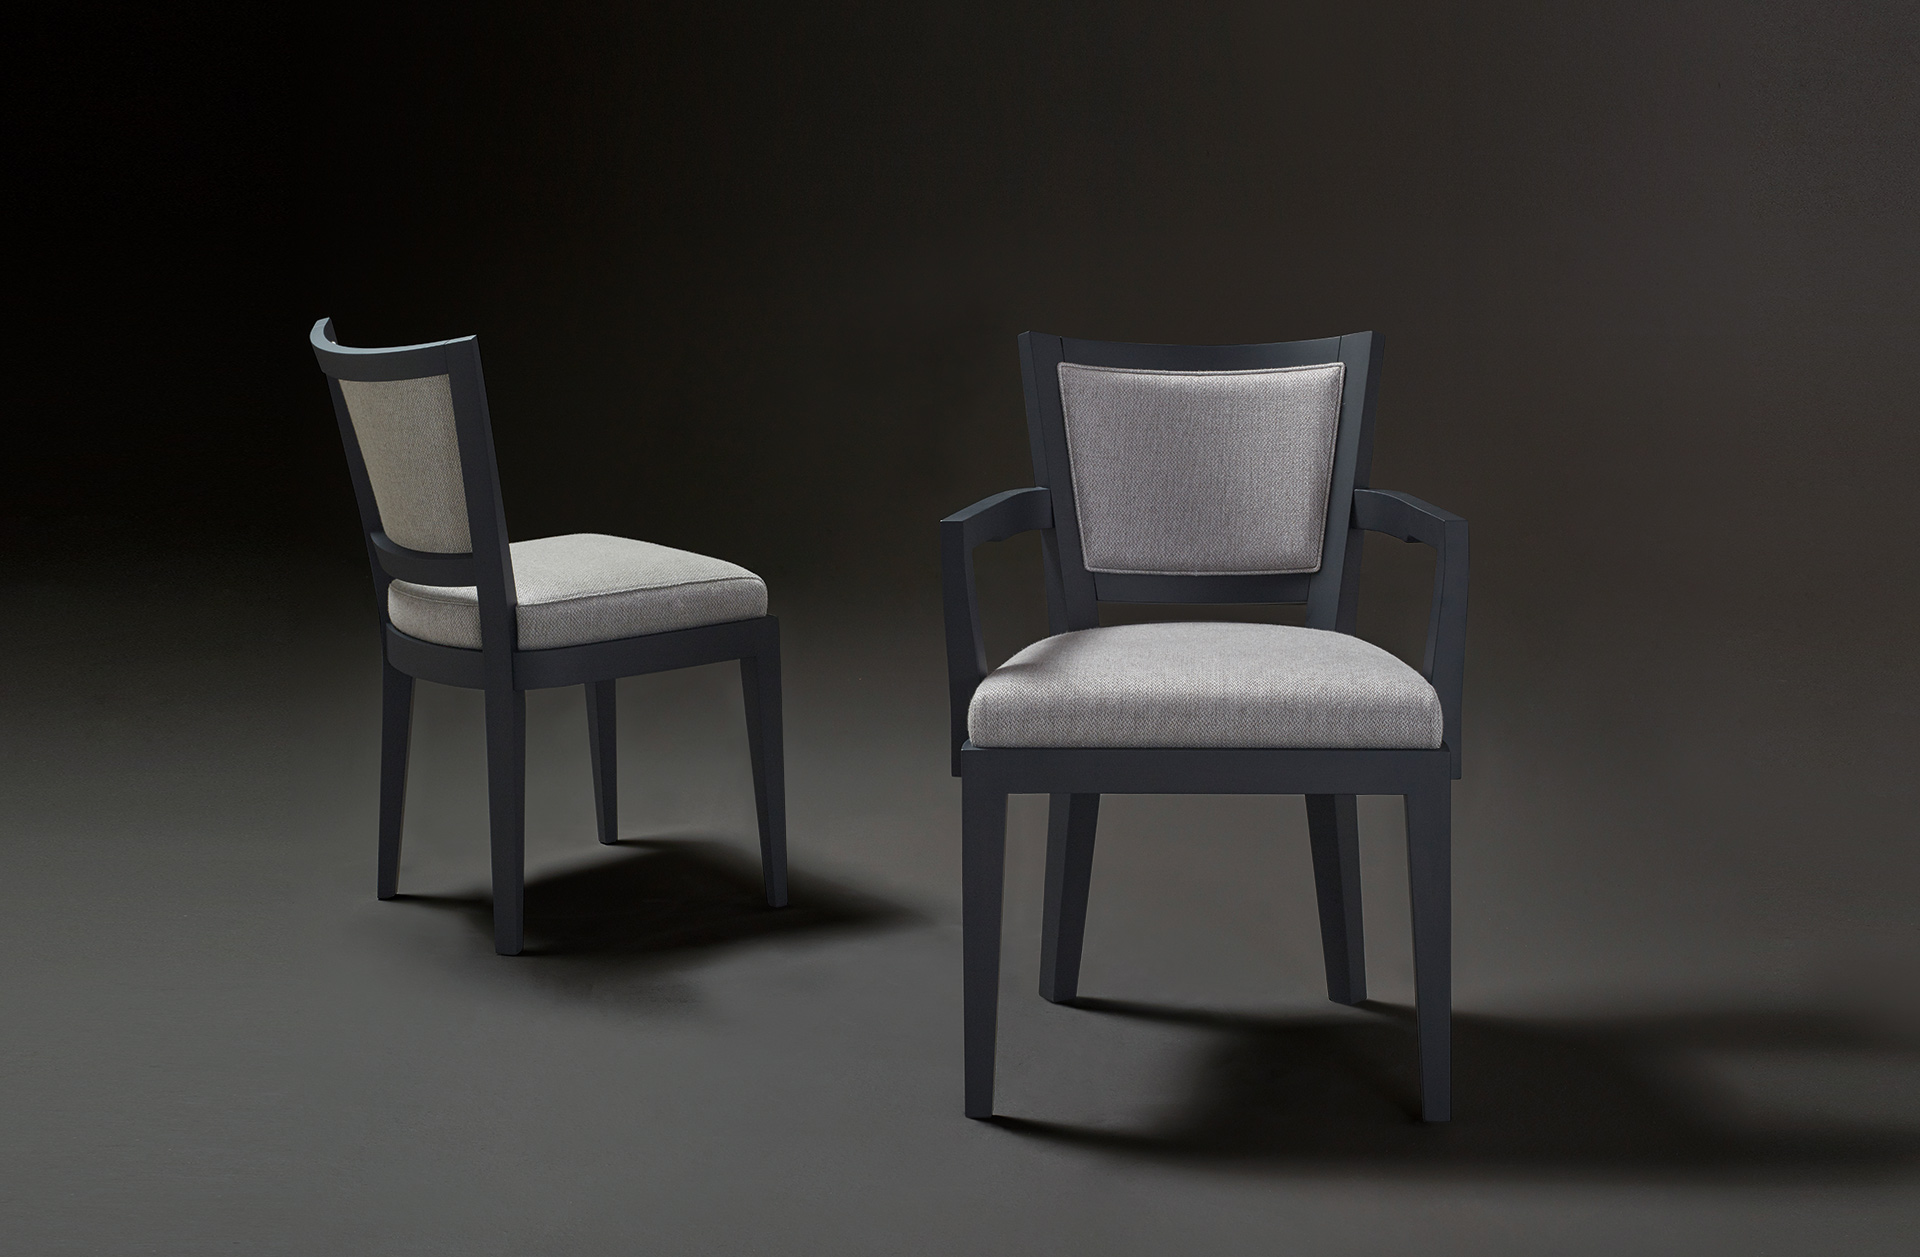 Caffè is a wooden dining chair, with straw backrest and fabric or leather seat, from Promemoria's catalogue | Promemoria